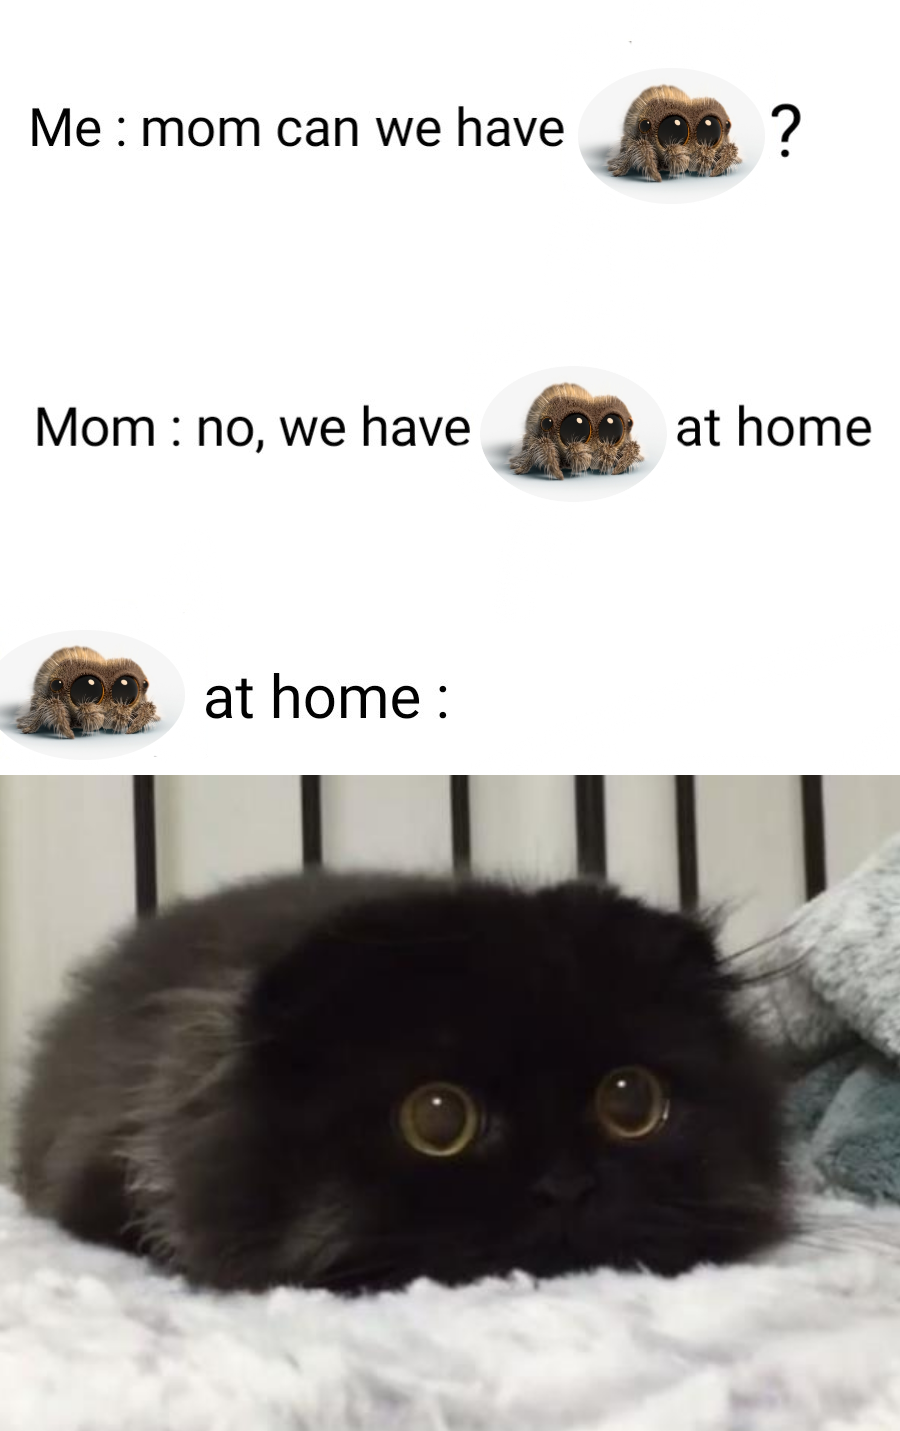 monday morning randomness - cat cute - Me mom can we have Mom no, we have at home ? at home